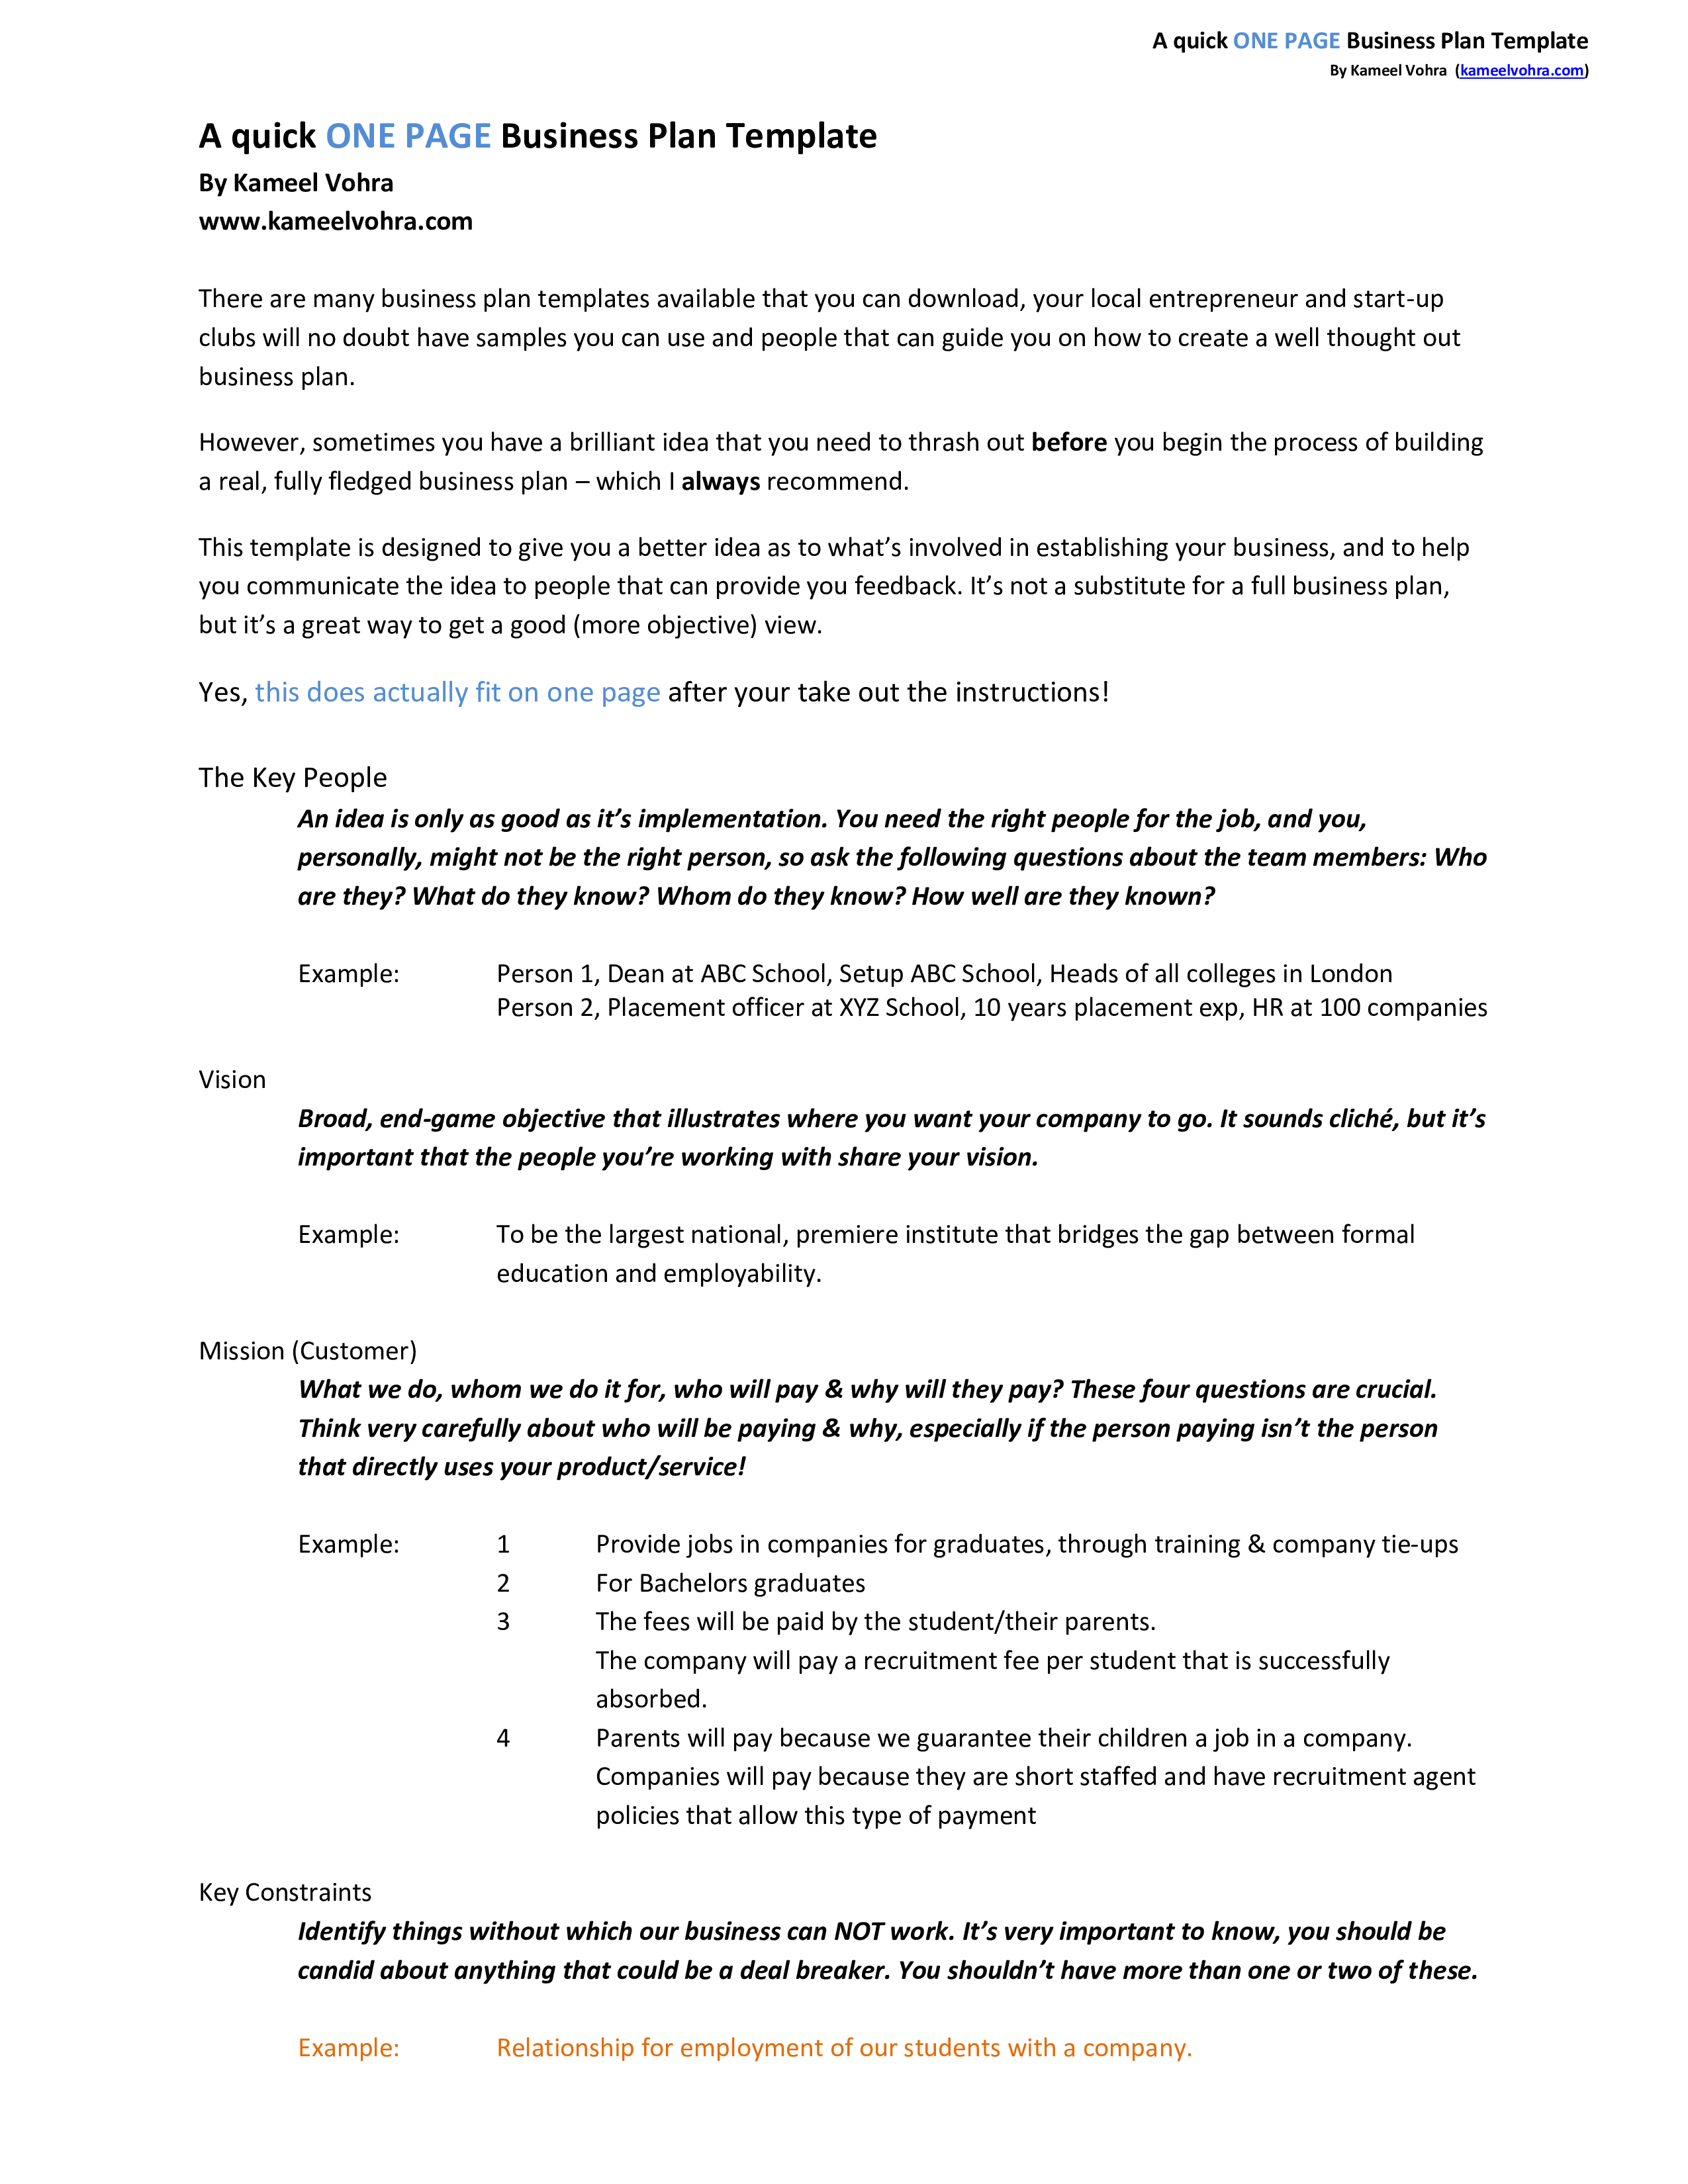 A Quick One Page Business Plan Template - Eloquens Within Business Case One Page Template